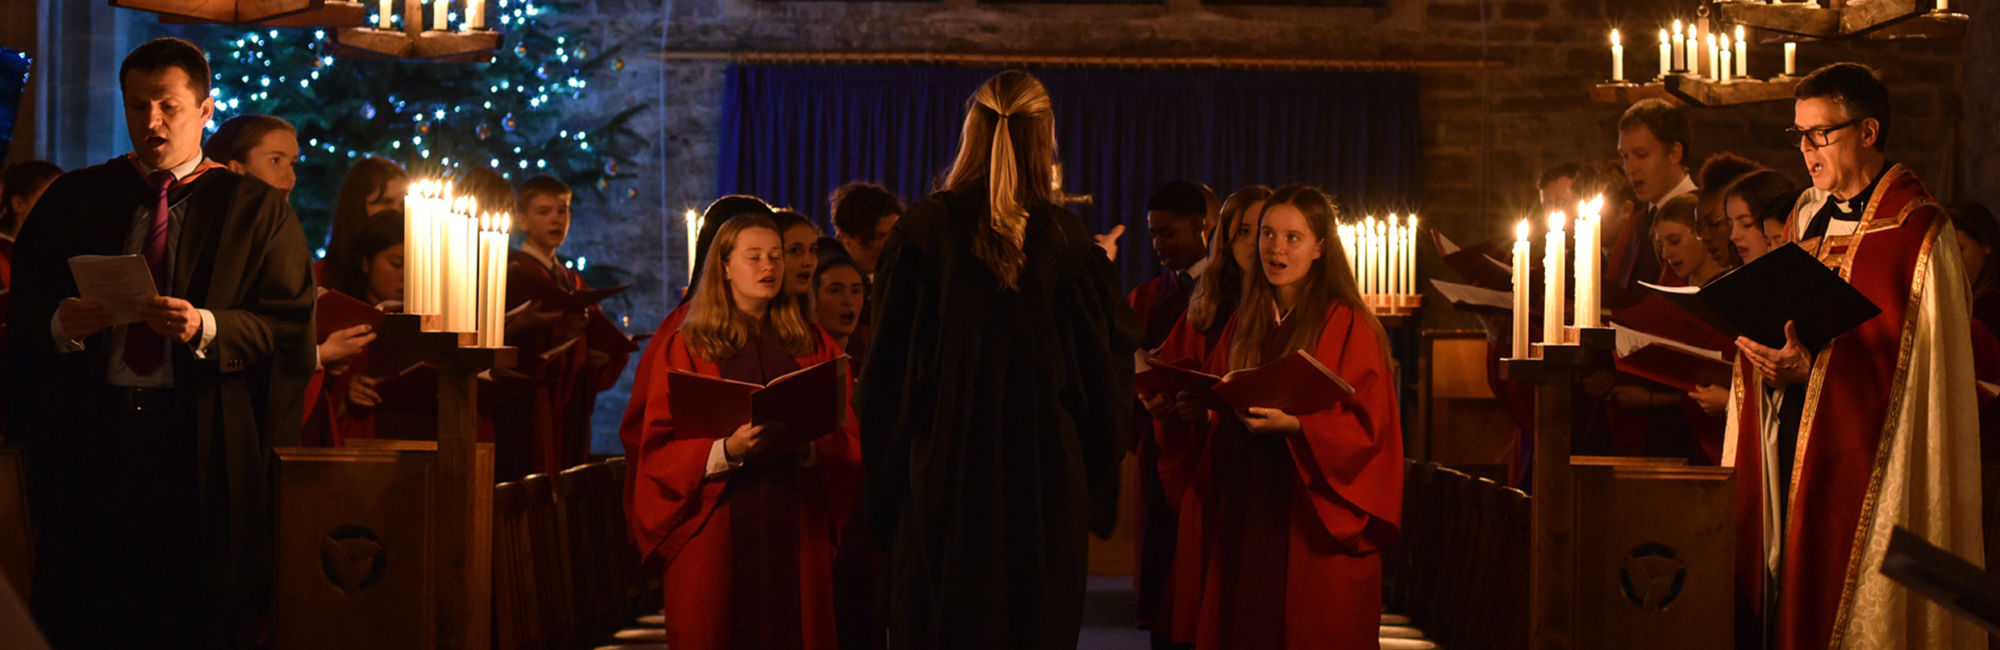 carol service at wycliffe independent school